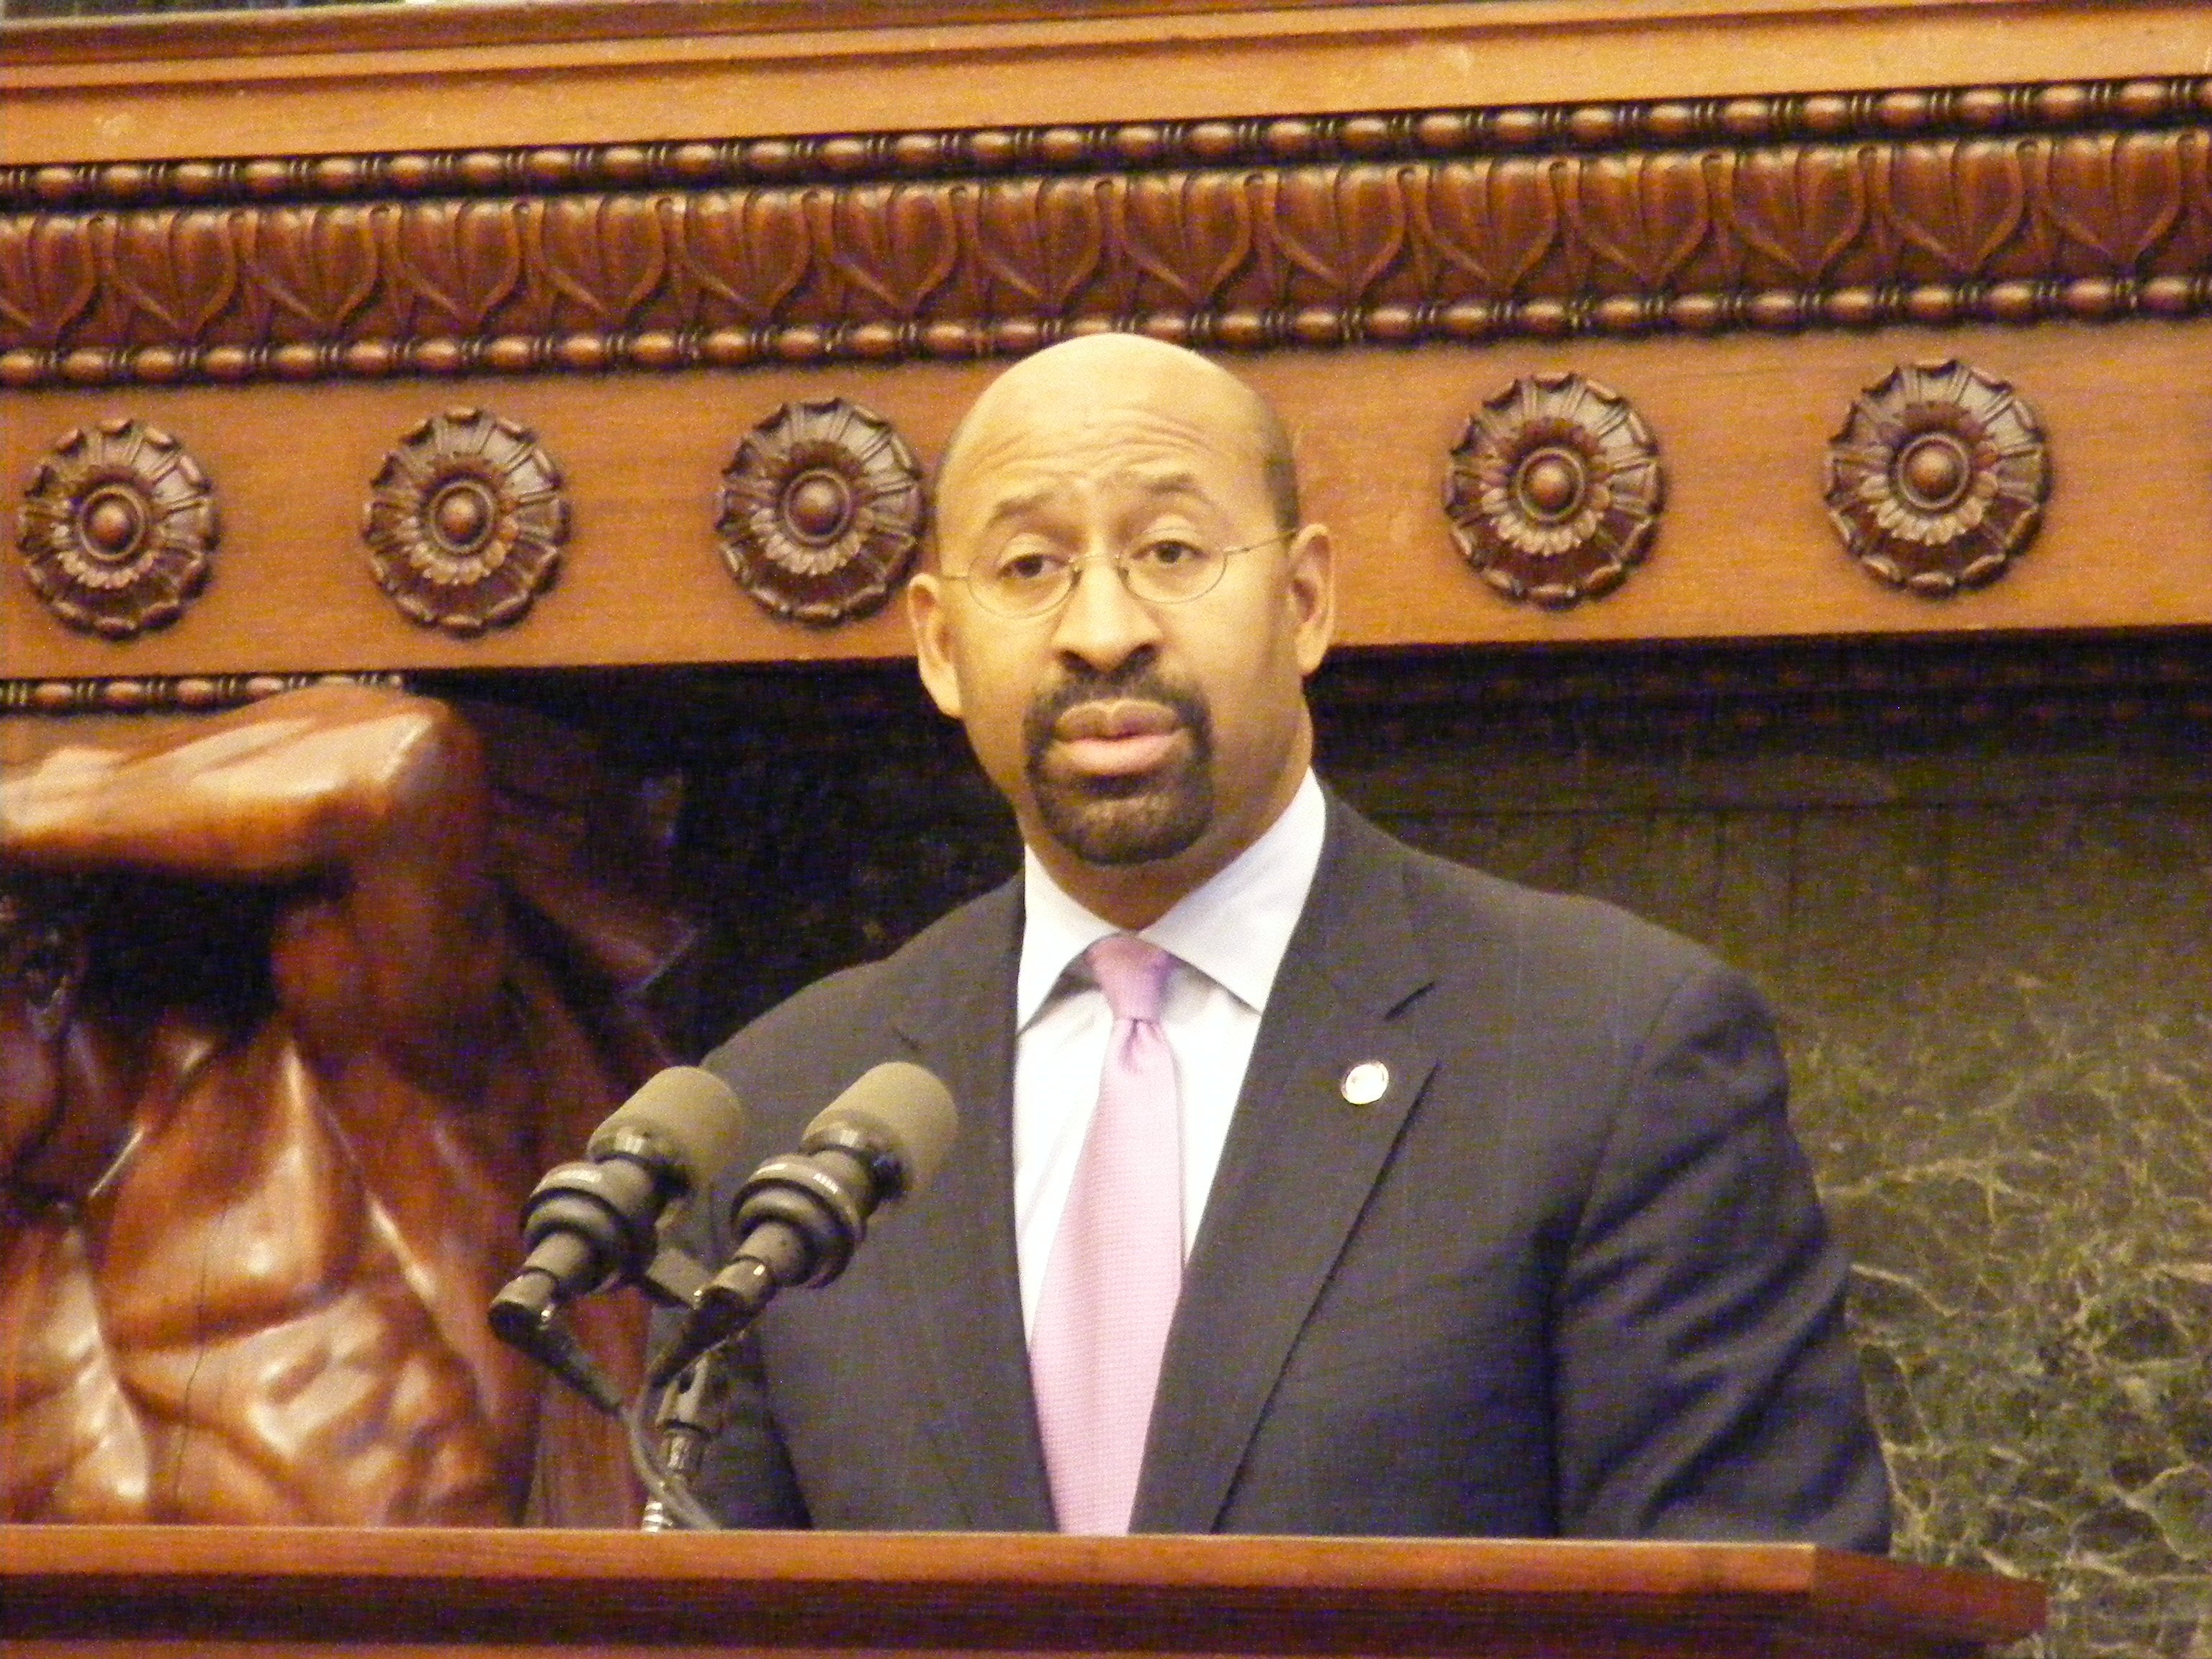 Mayor Michael Nutter. Photo by Tom MacDonald/WHYY